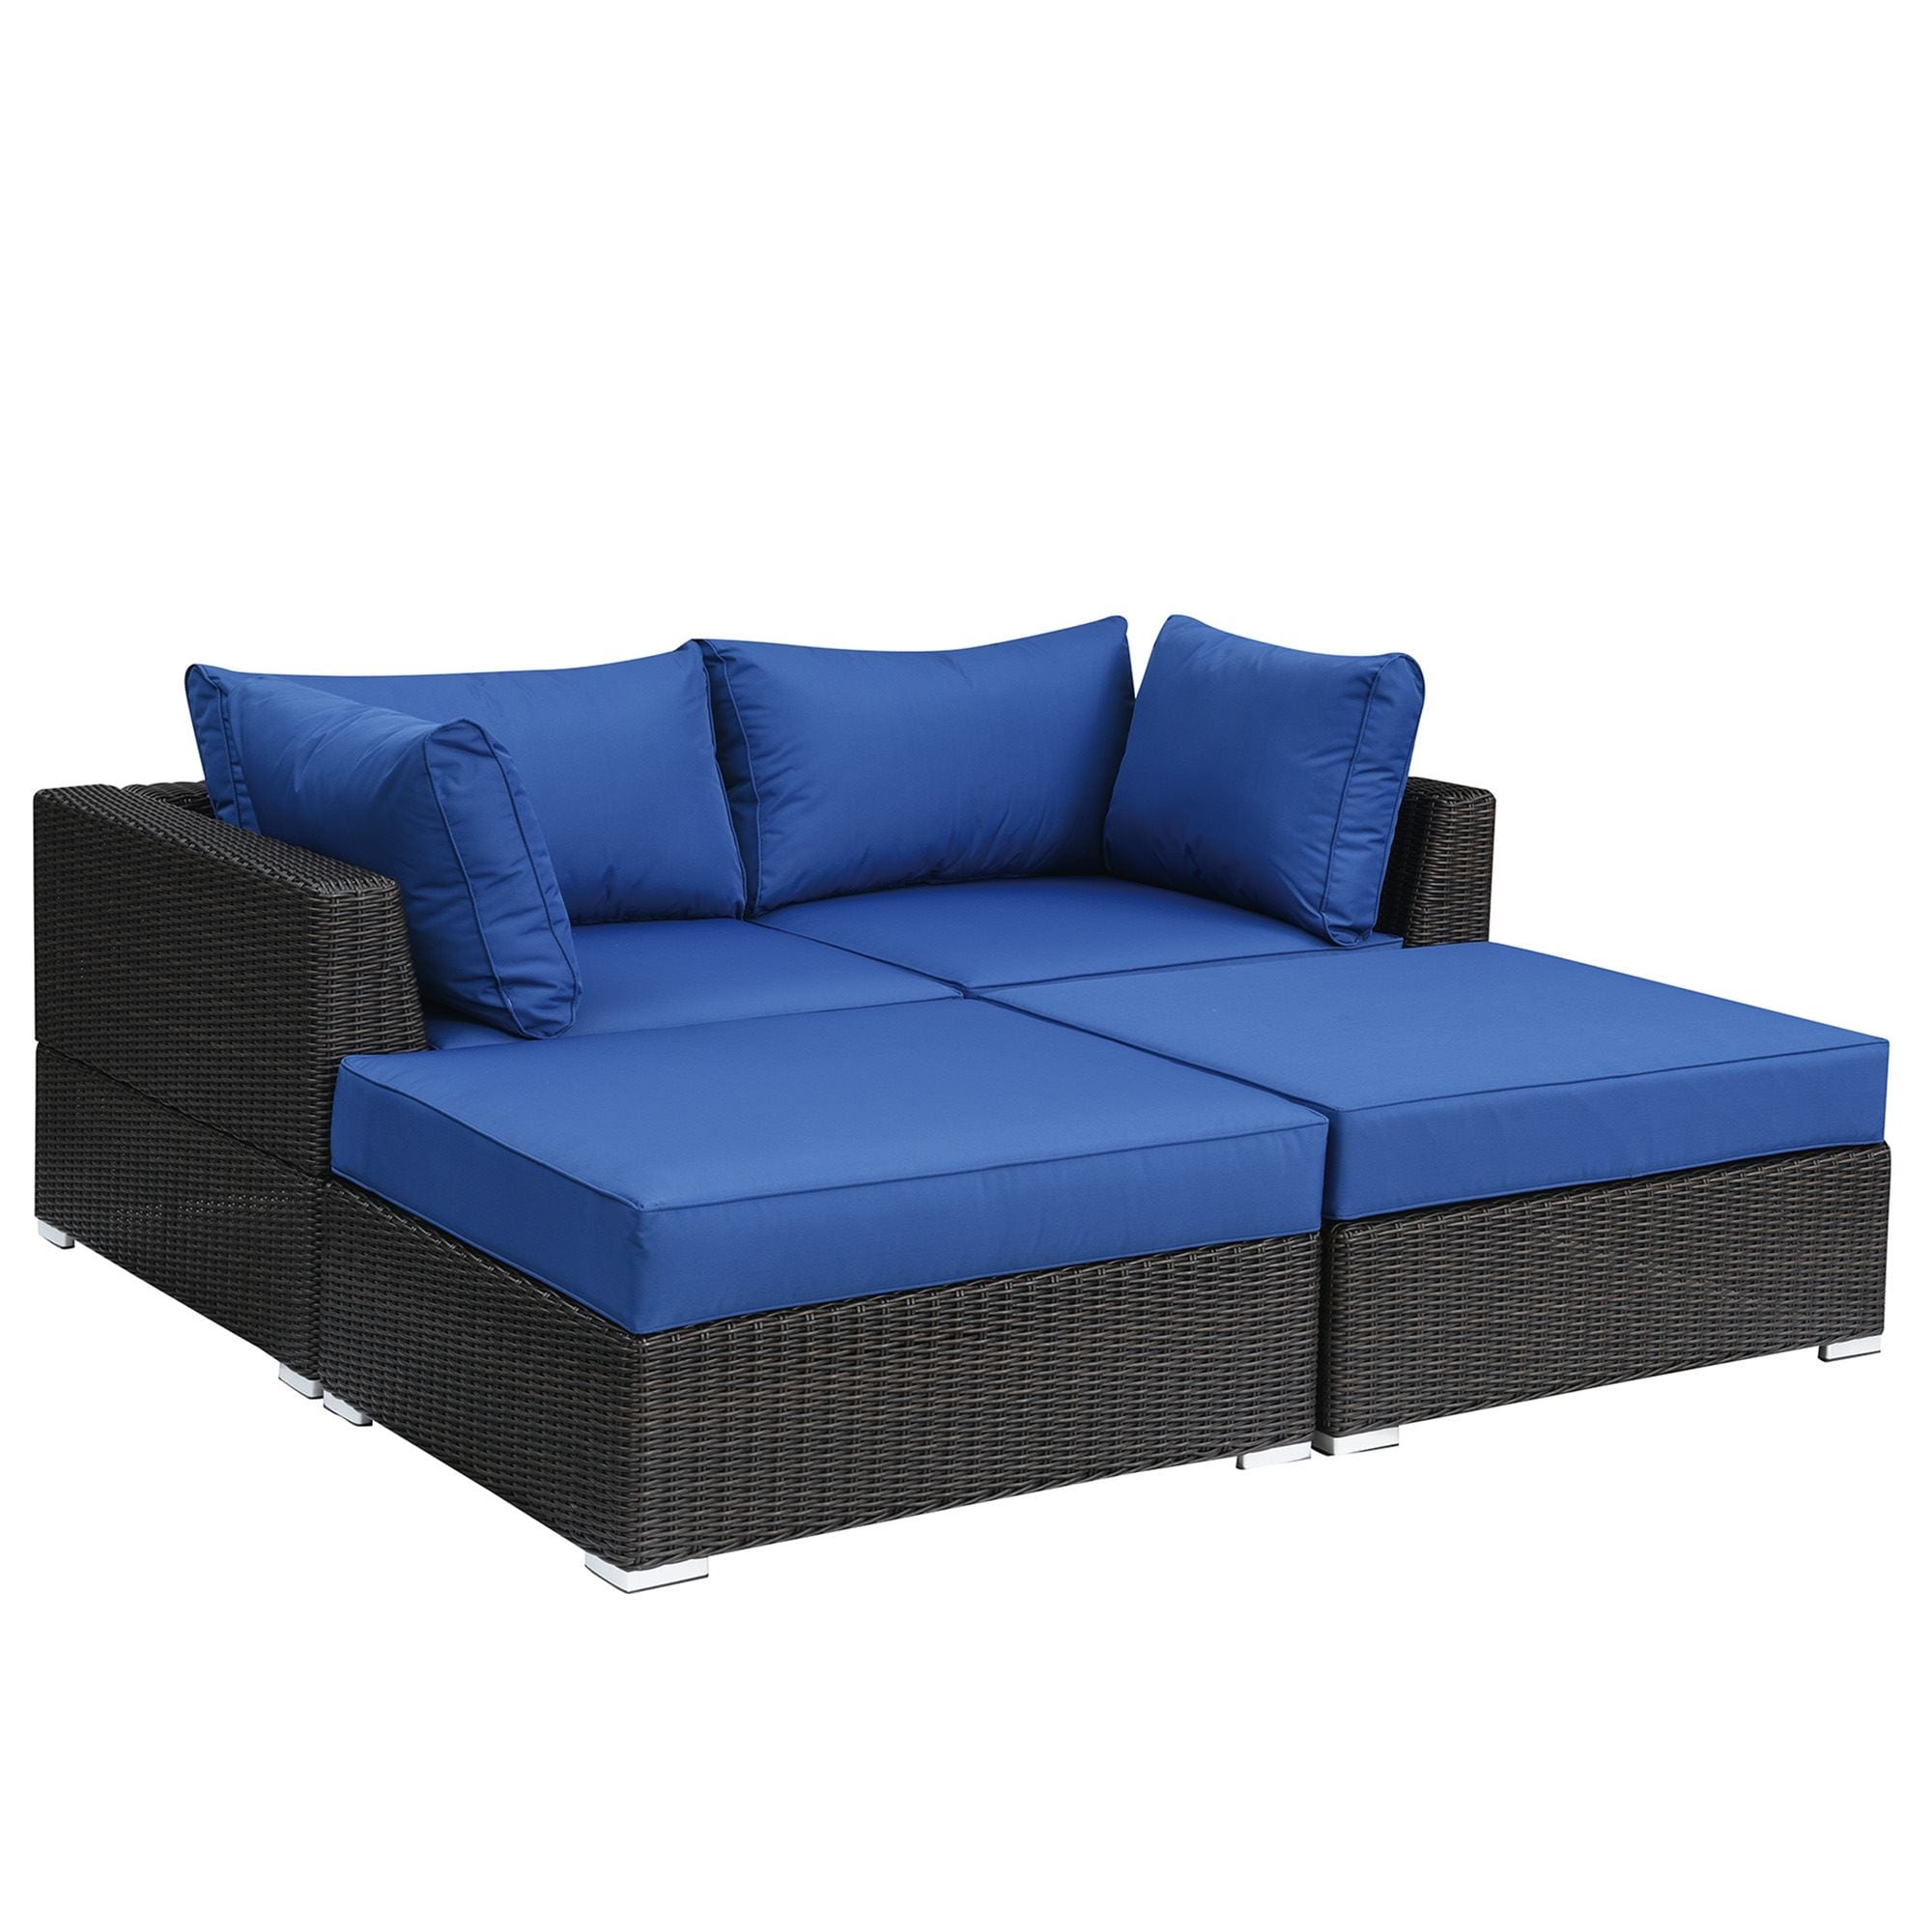 Poundex Furntiure Wicker-fabric Outdoor Loveseat 4-pc